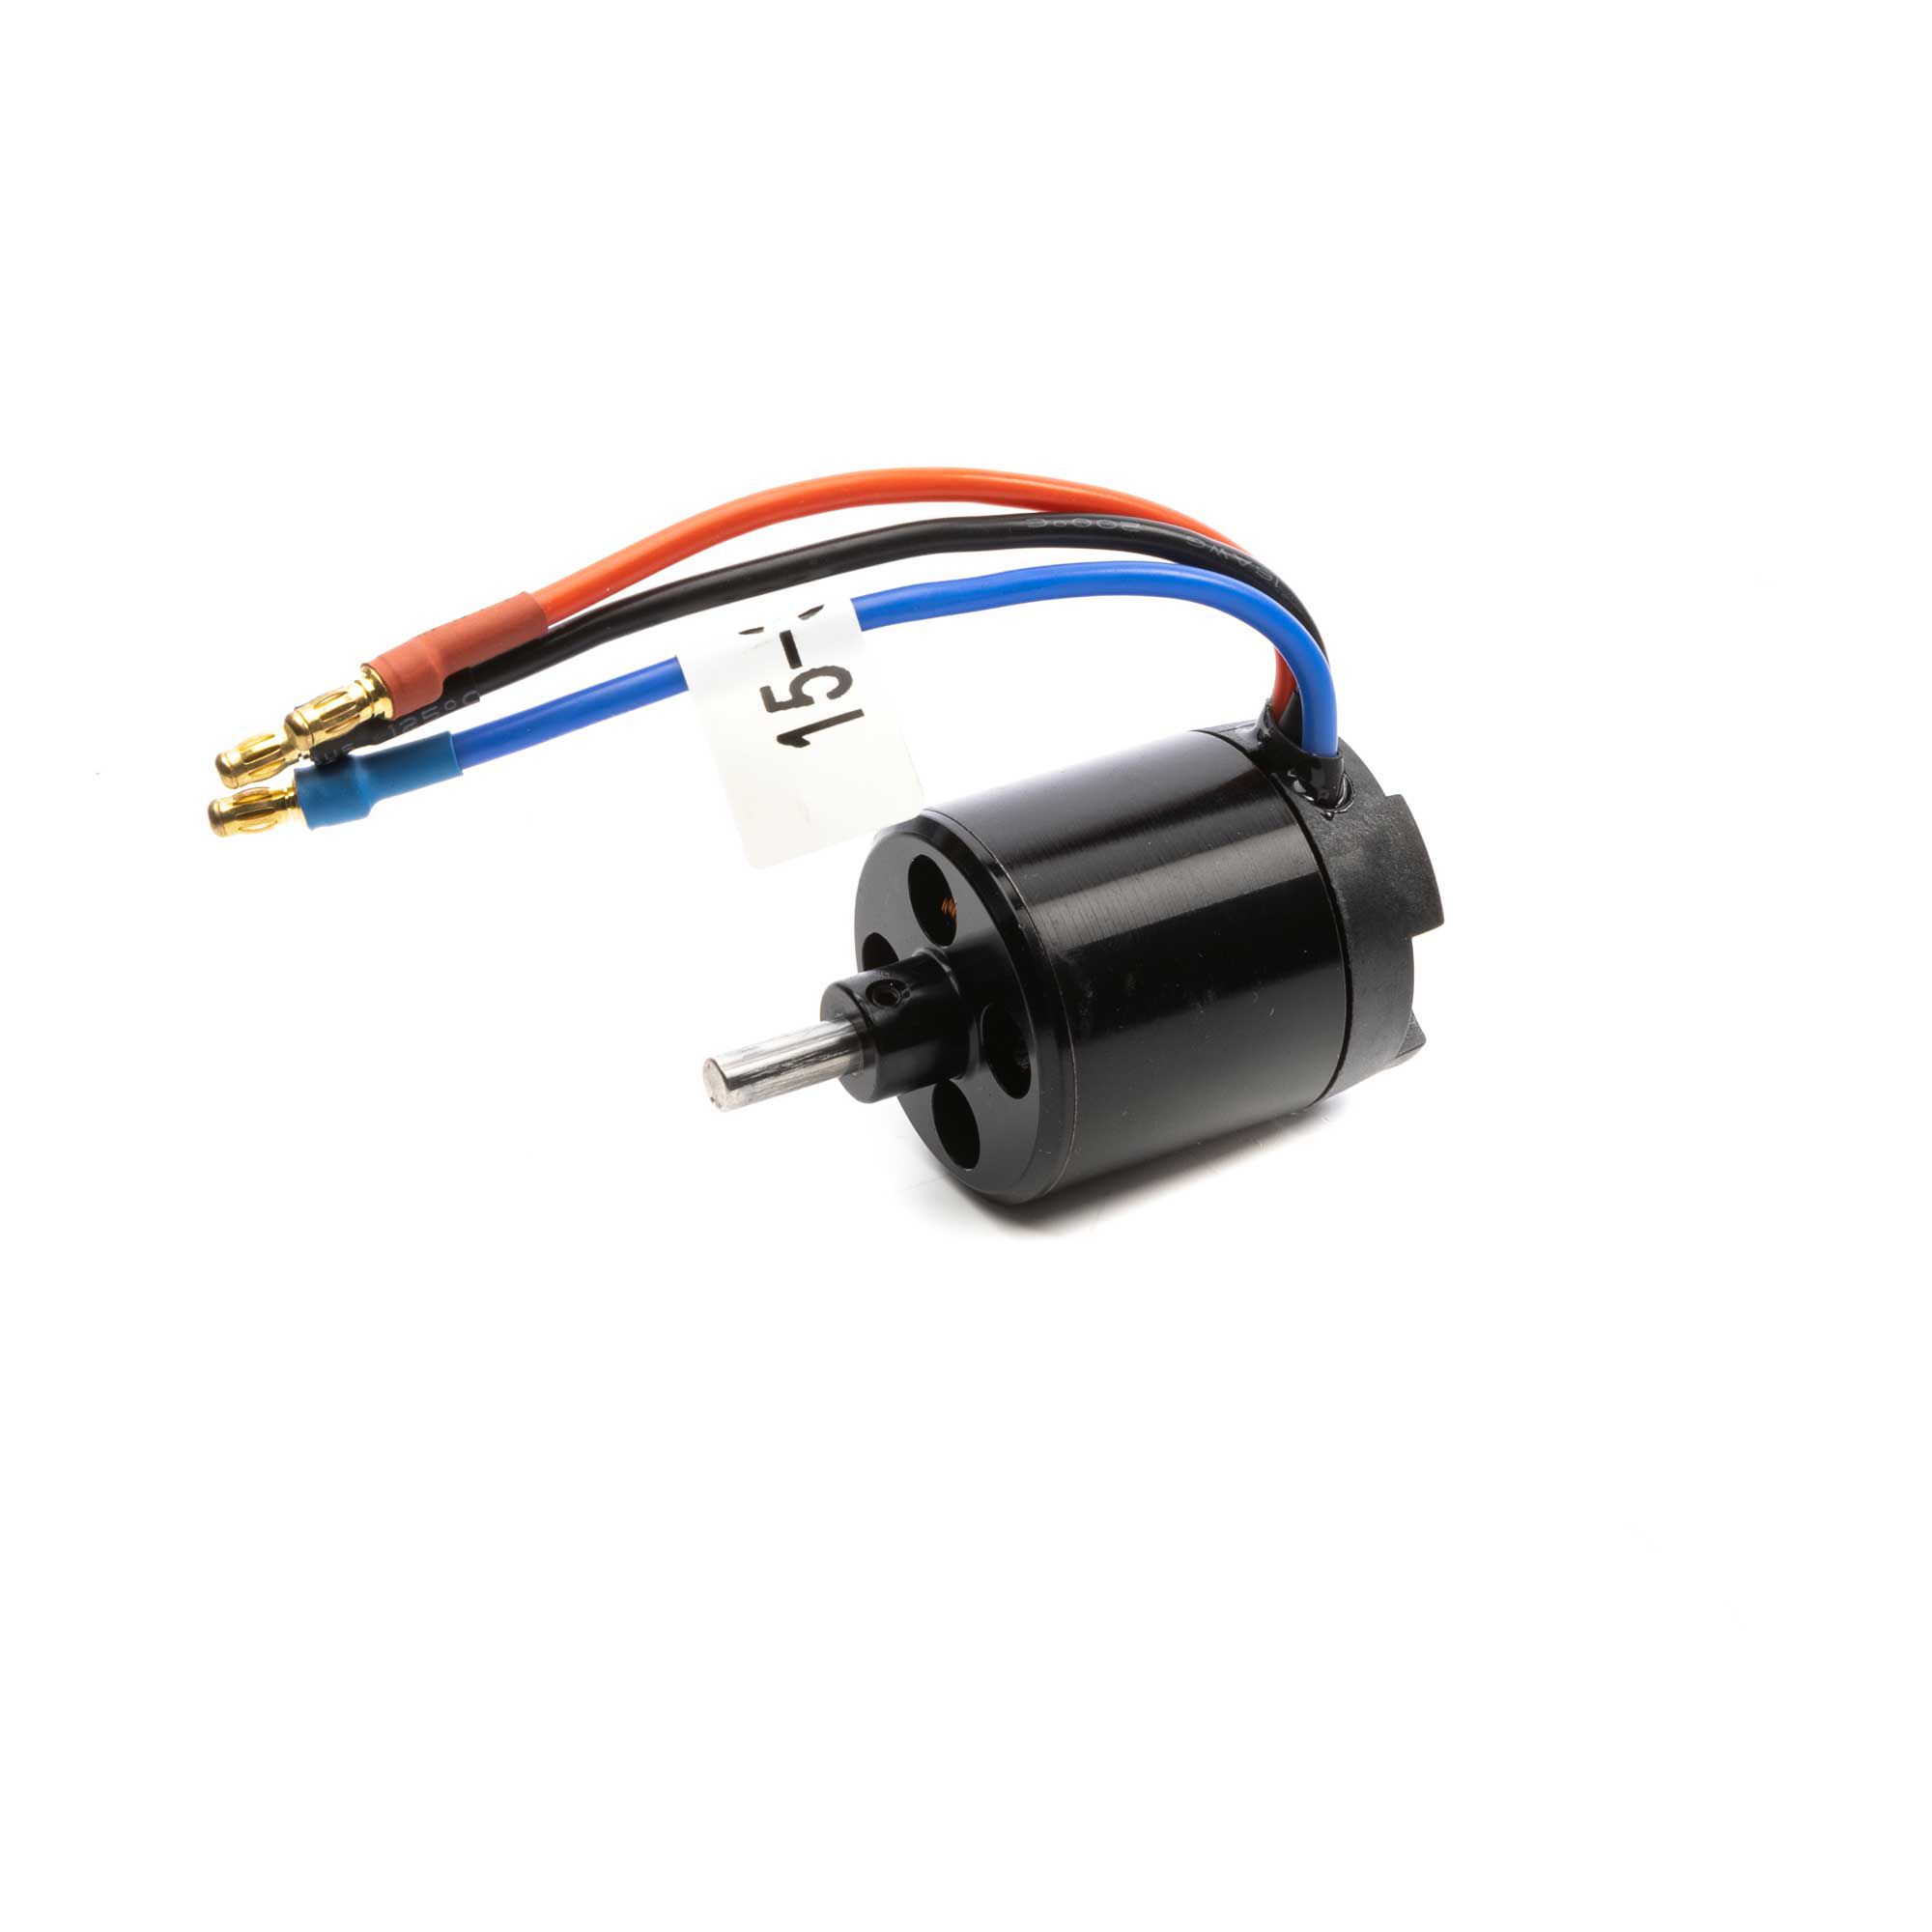 E-flite Shaft Power 15 Brushless Outrunner EFLM40151 Motor Accessories/Gearboxes 